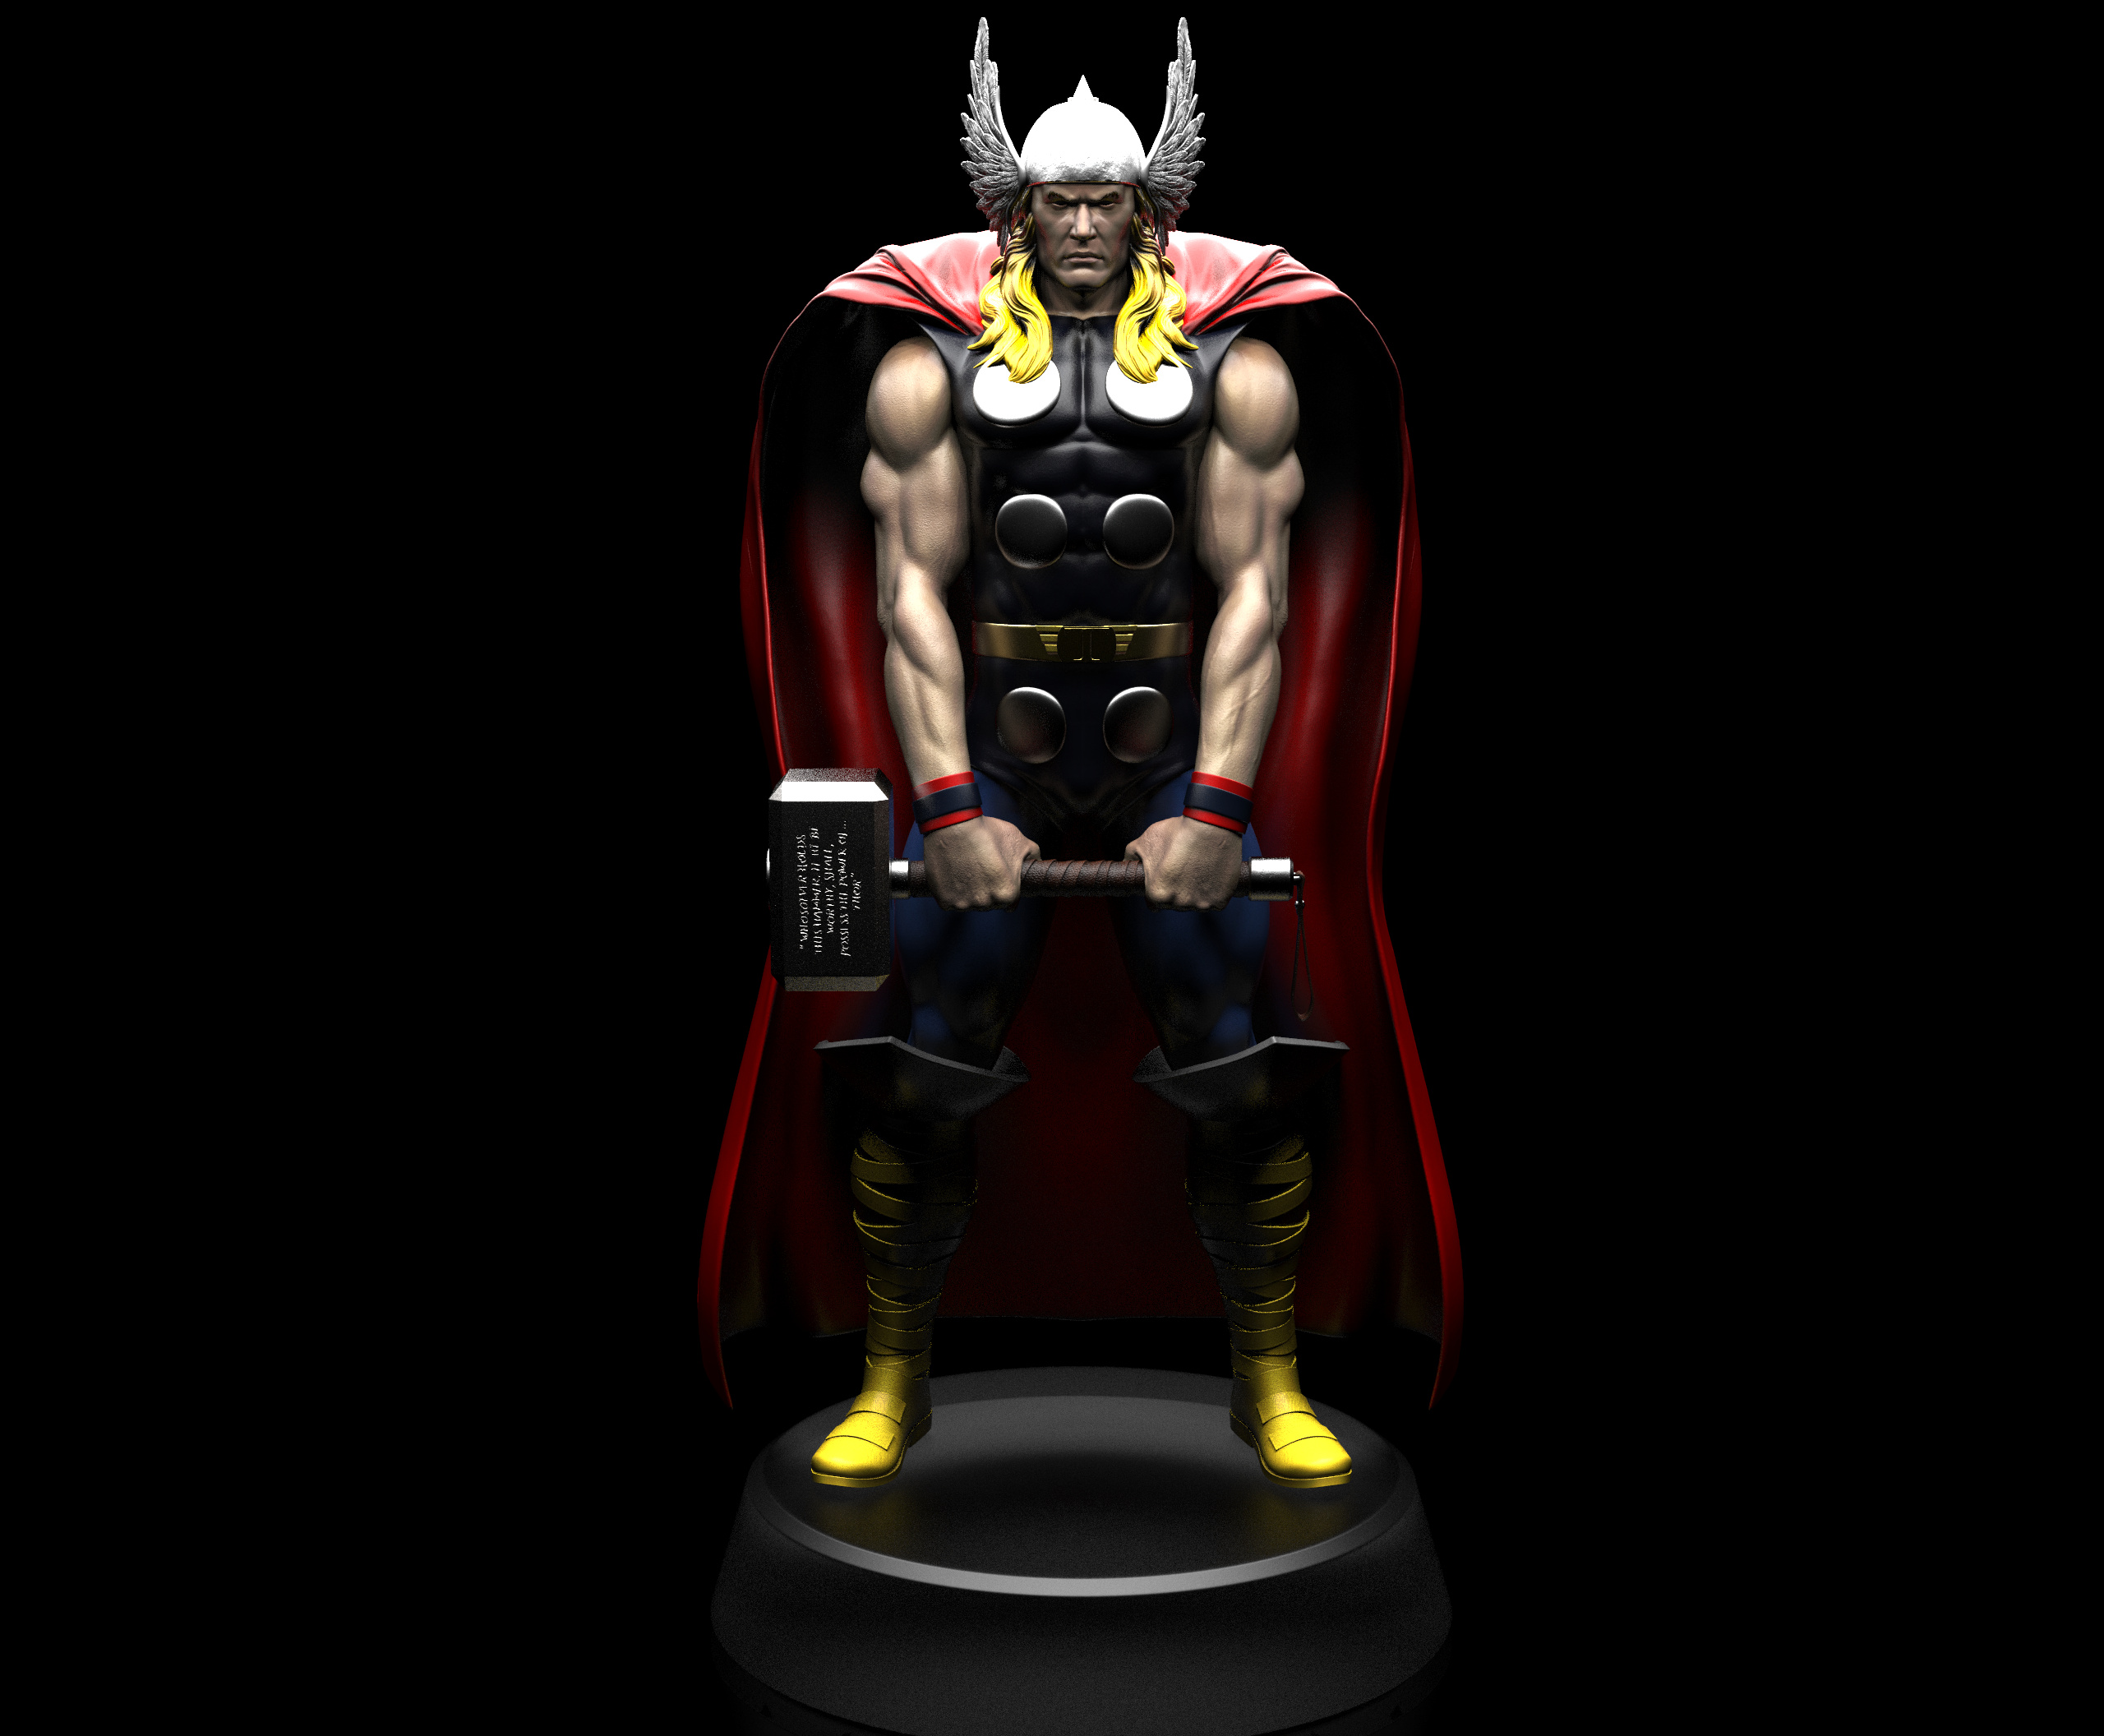 Almighty Thor